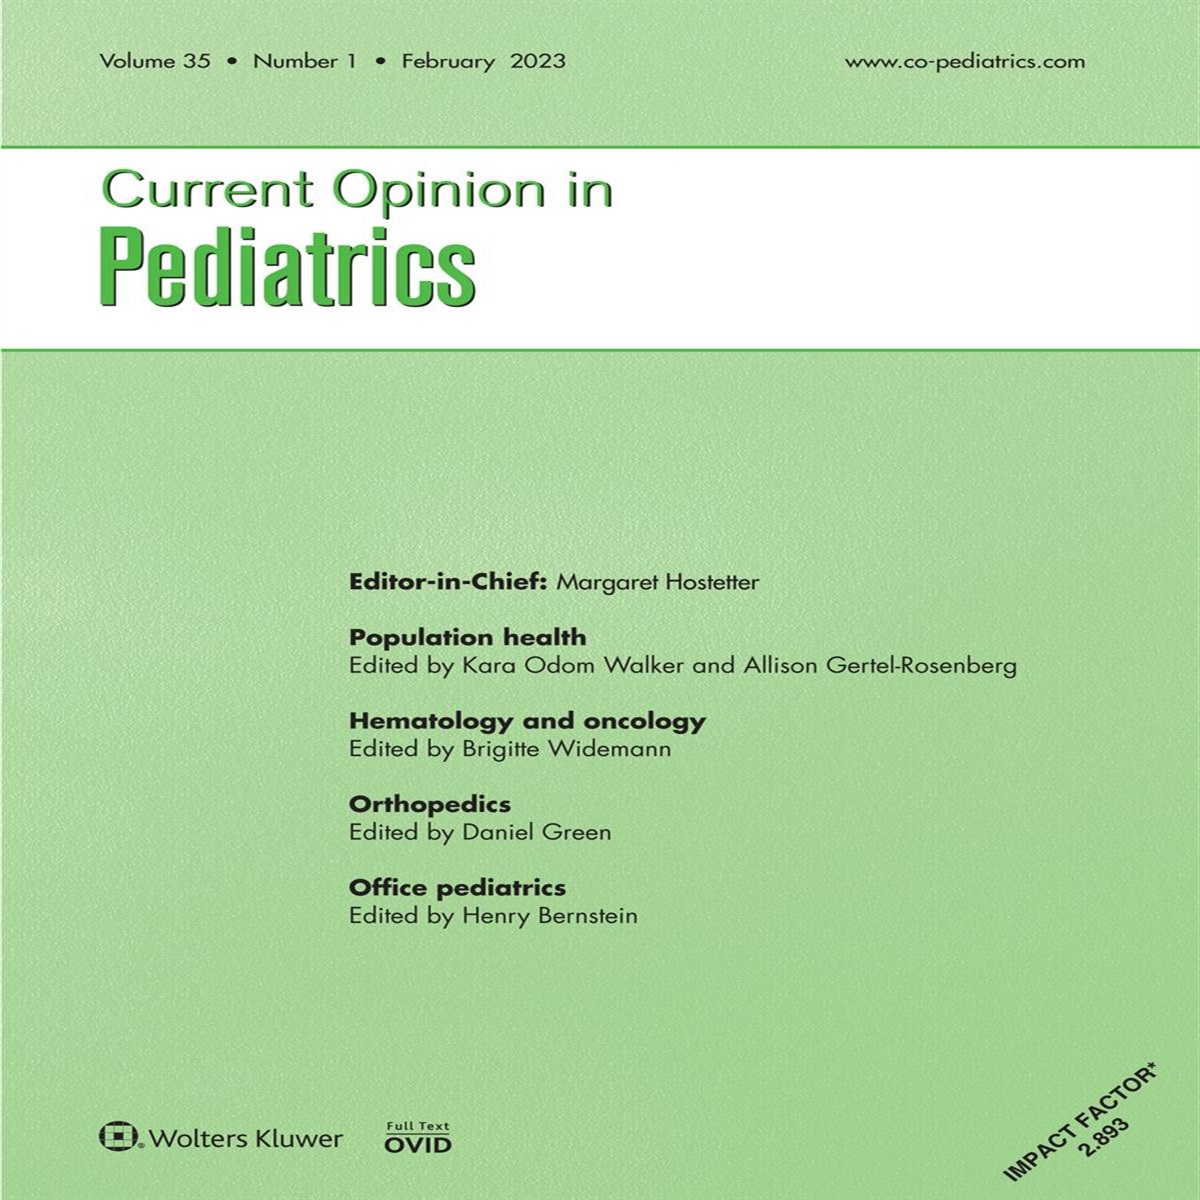 Advances, challenges and progress in pediatric hematology and oncology